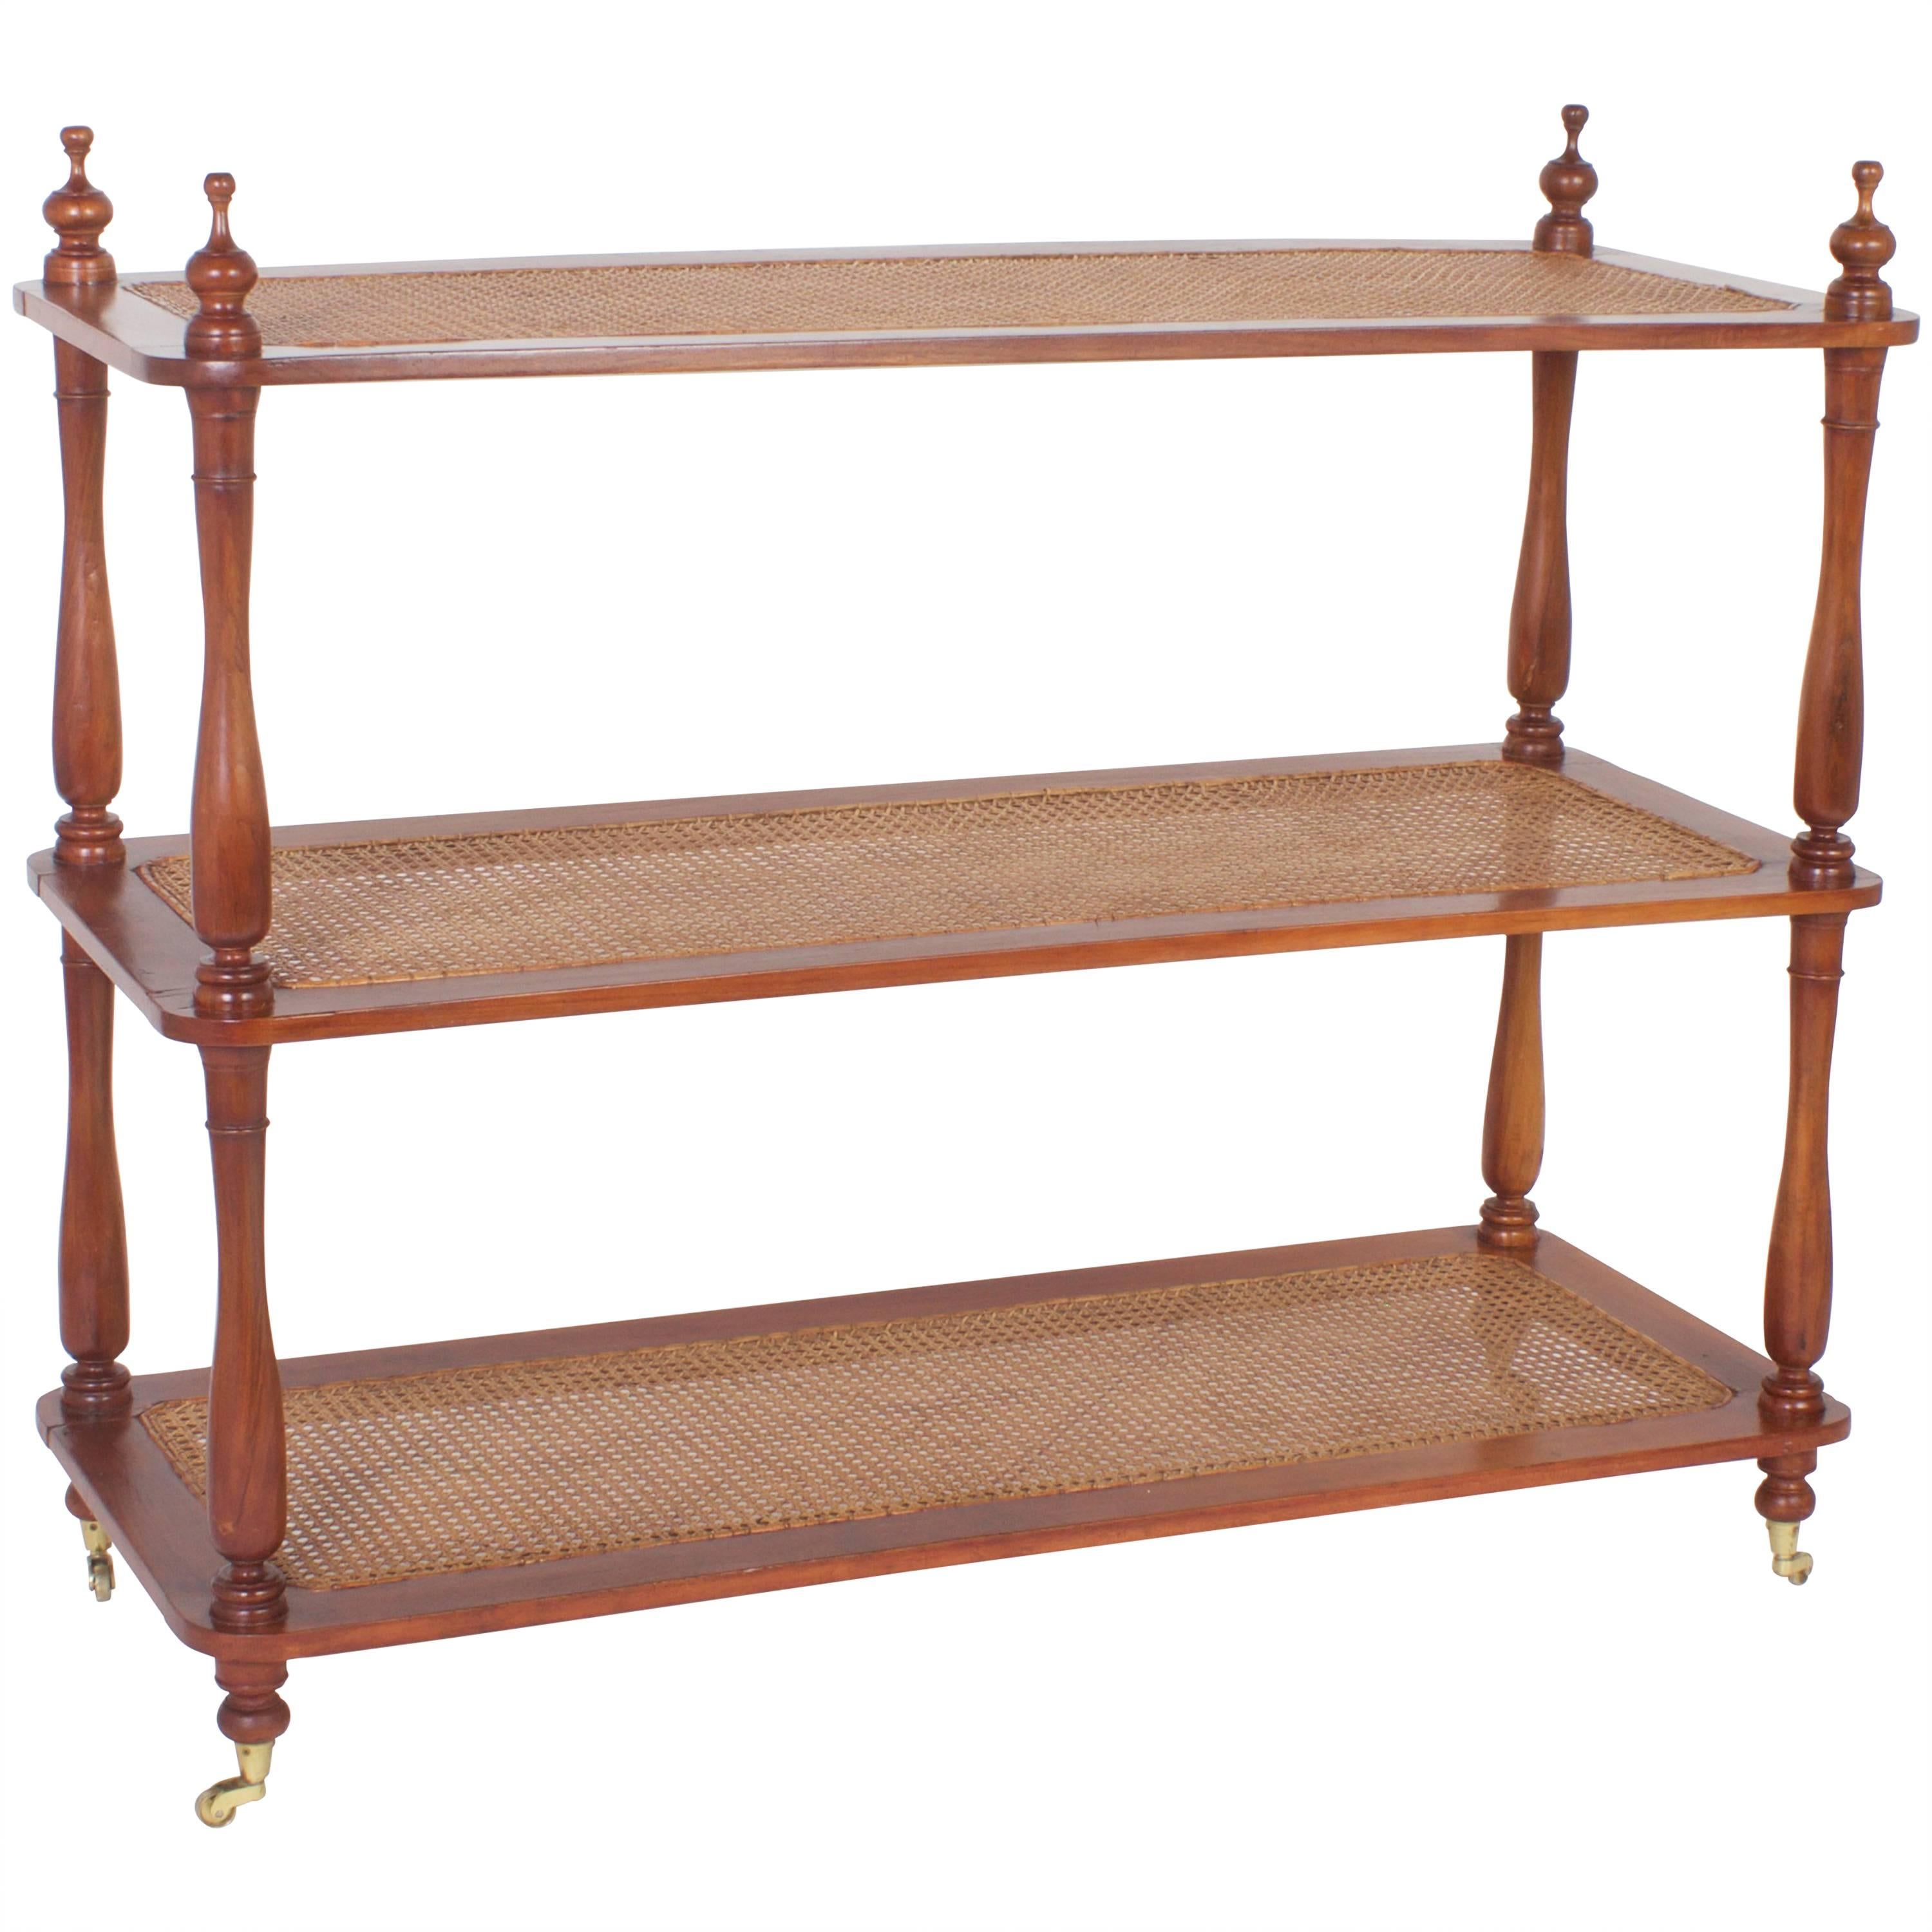 Three-Tiered Antique Cane Shelf Etagere or Set of Shelves in Mahogany